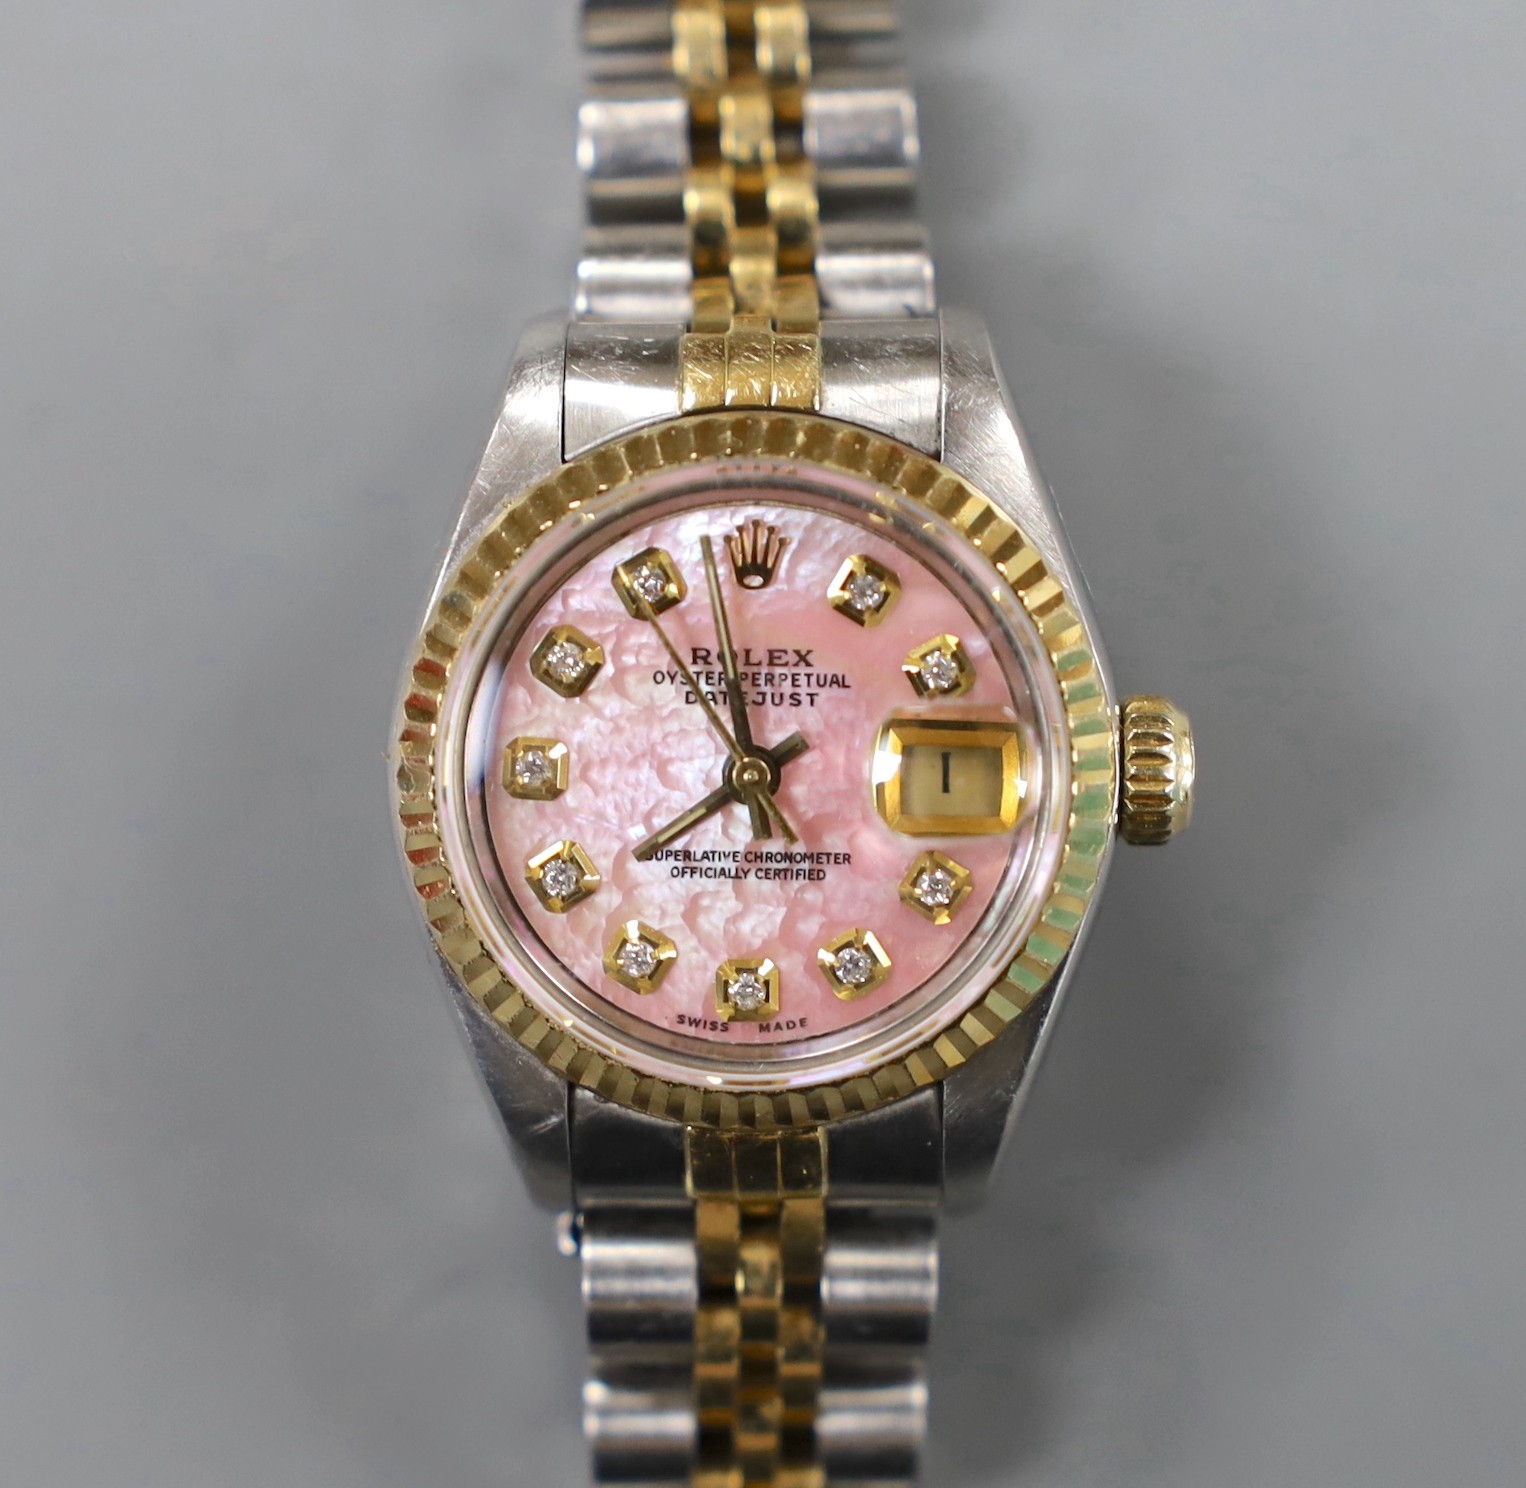 A lady's 2015 steel and gold Rolex Oyster Perpetual Datejust wrist watch, with pink mother of pearl dial and diamond set markers, model no. 69173, serial no. R401799, case diameter 26mm, with box and certificate.